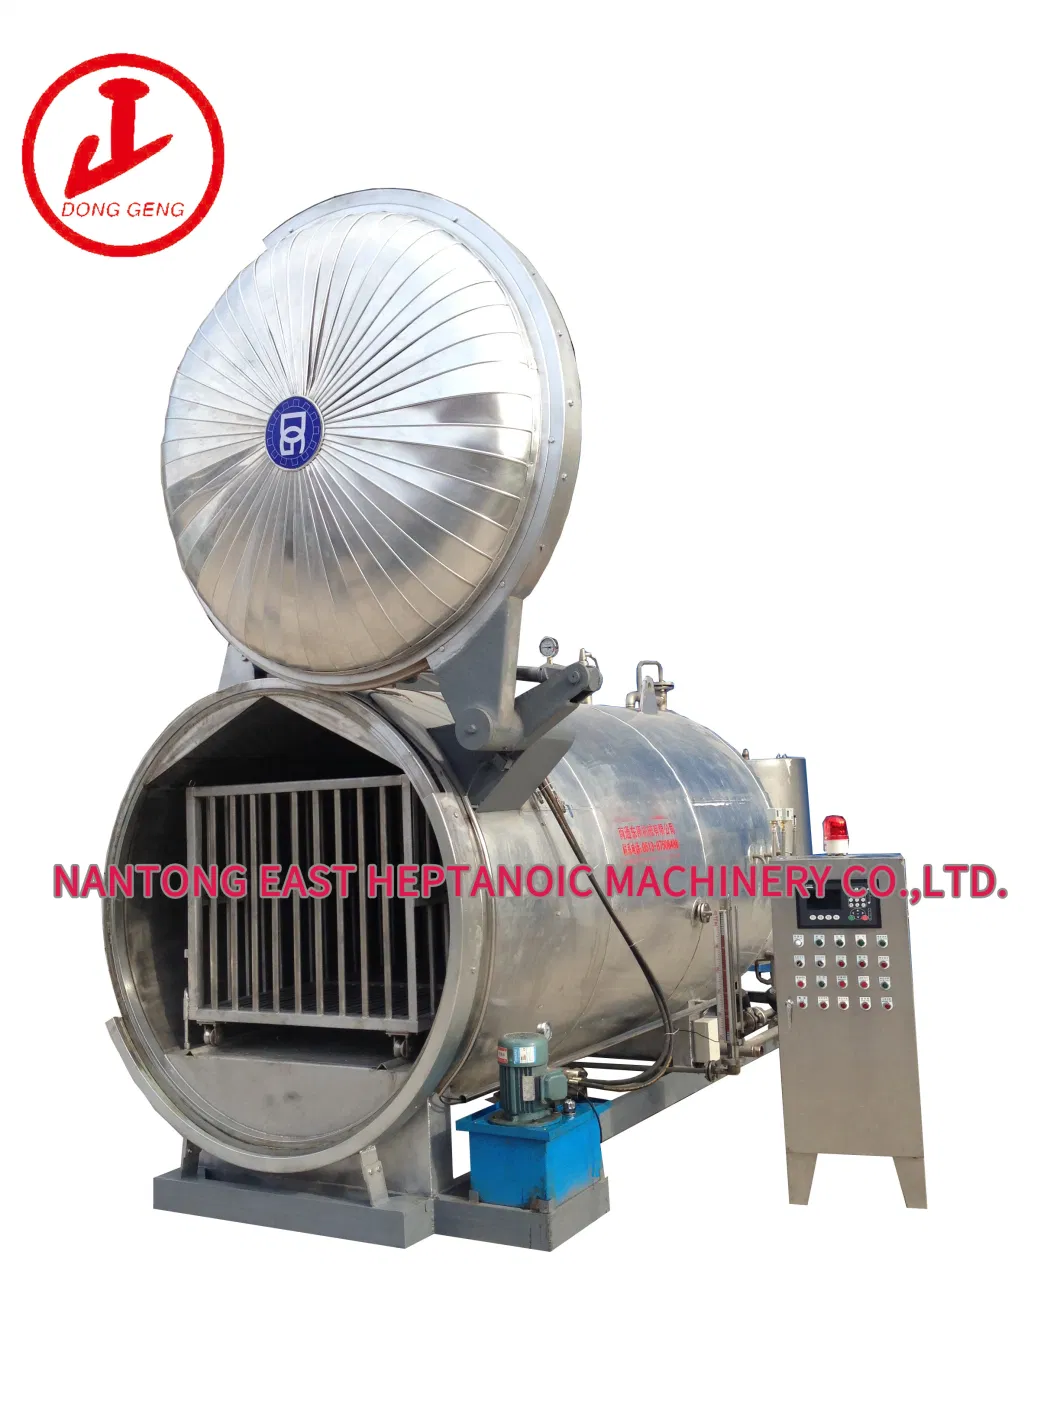 High Temperature and High Pressure Vacuum Setting Machine Is Used for Knitting